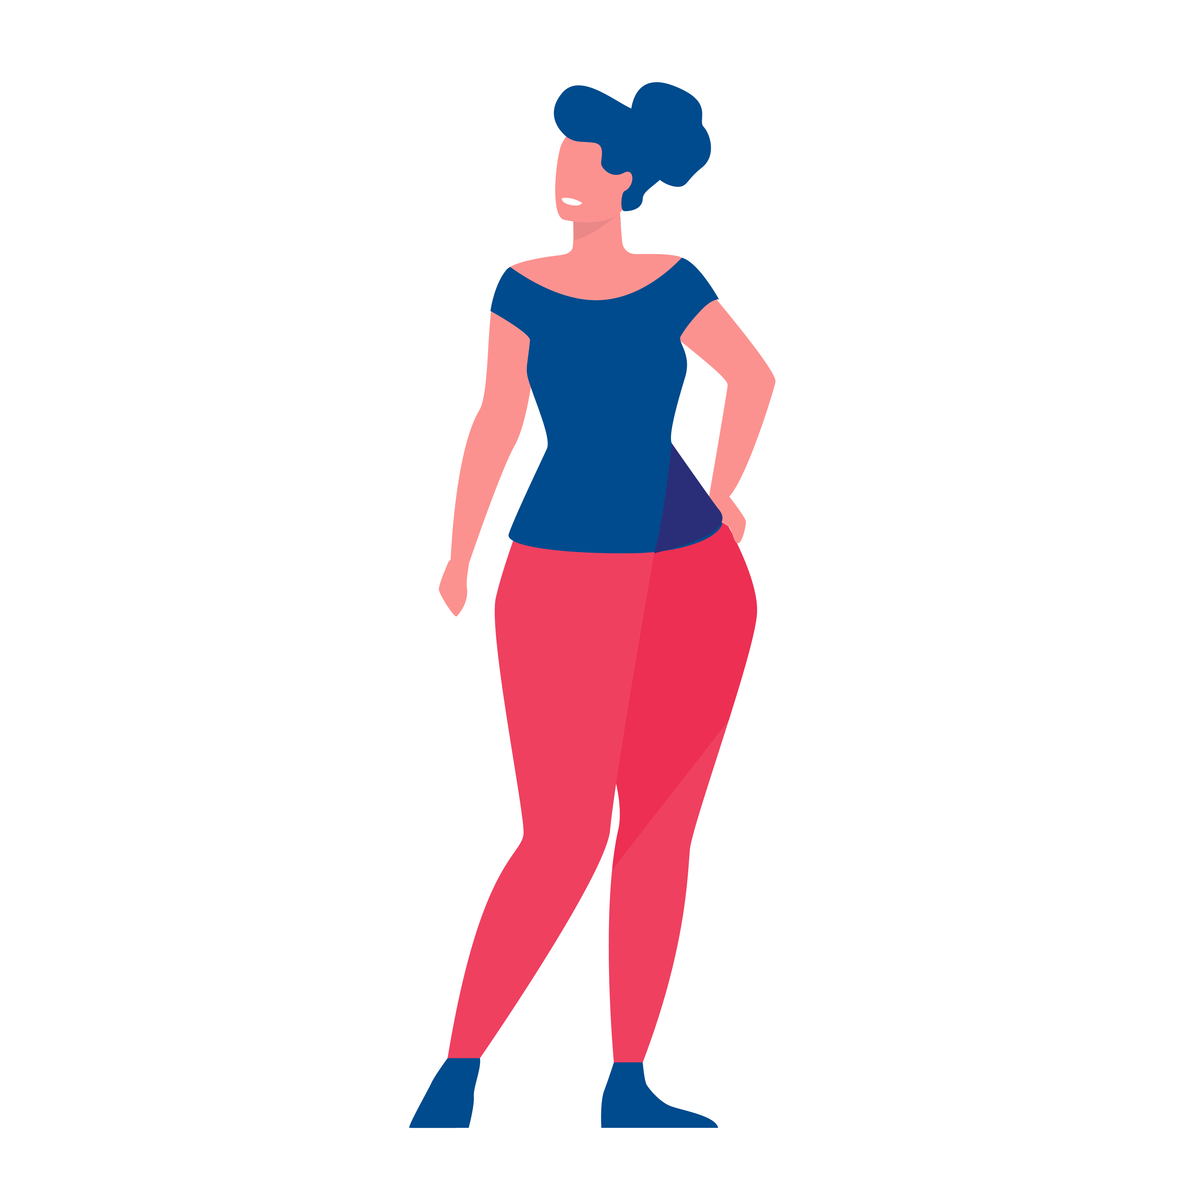 A graphic of a woman